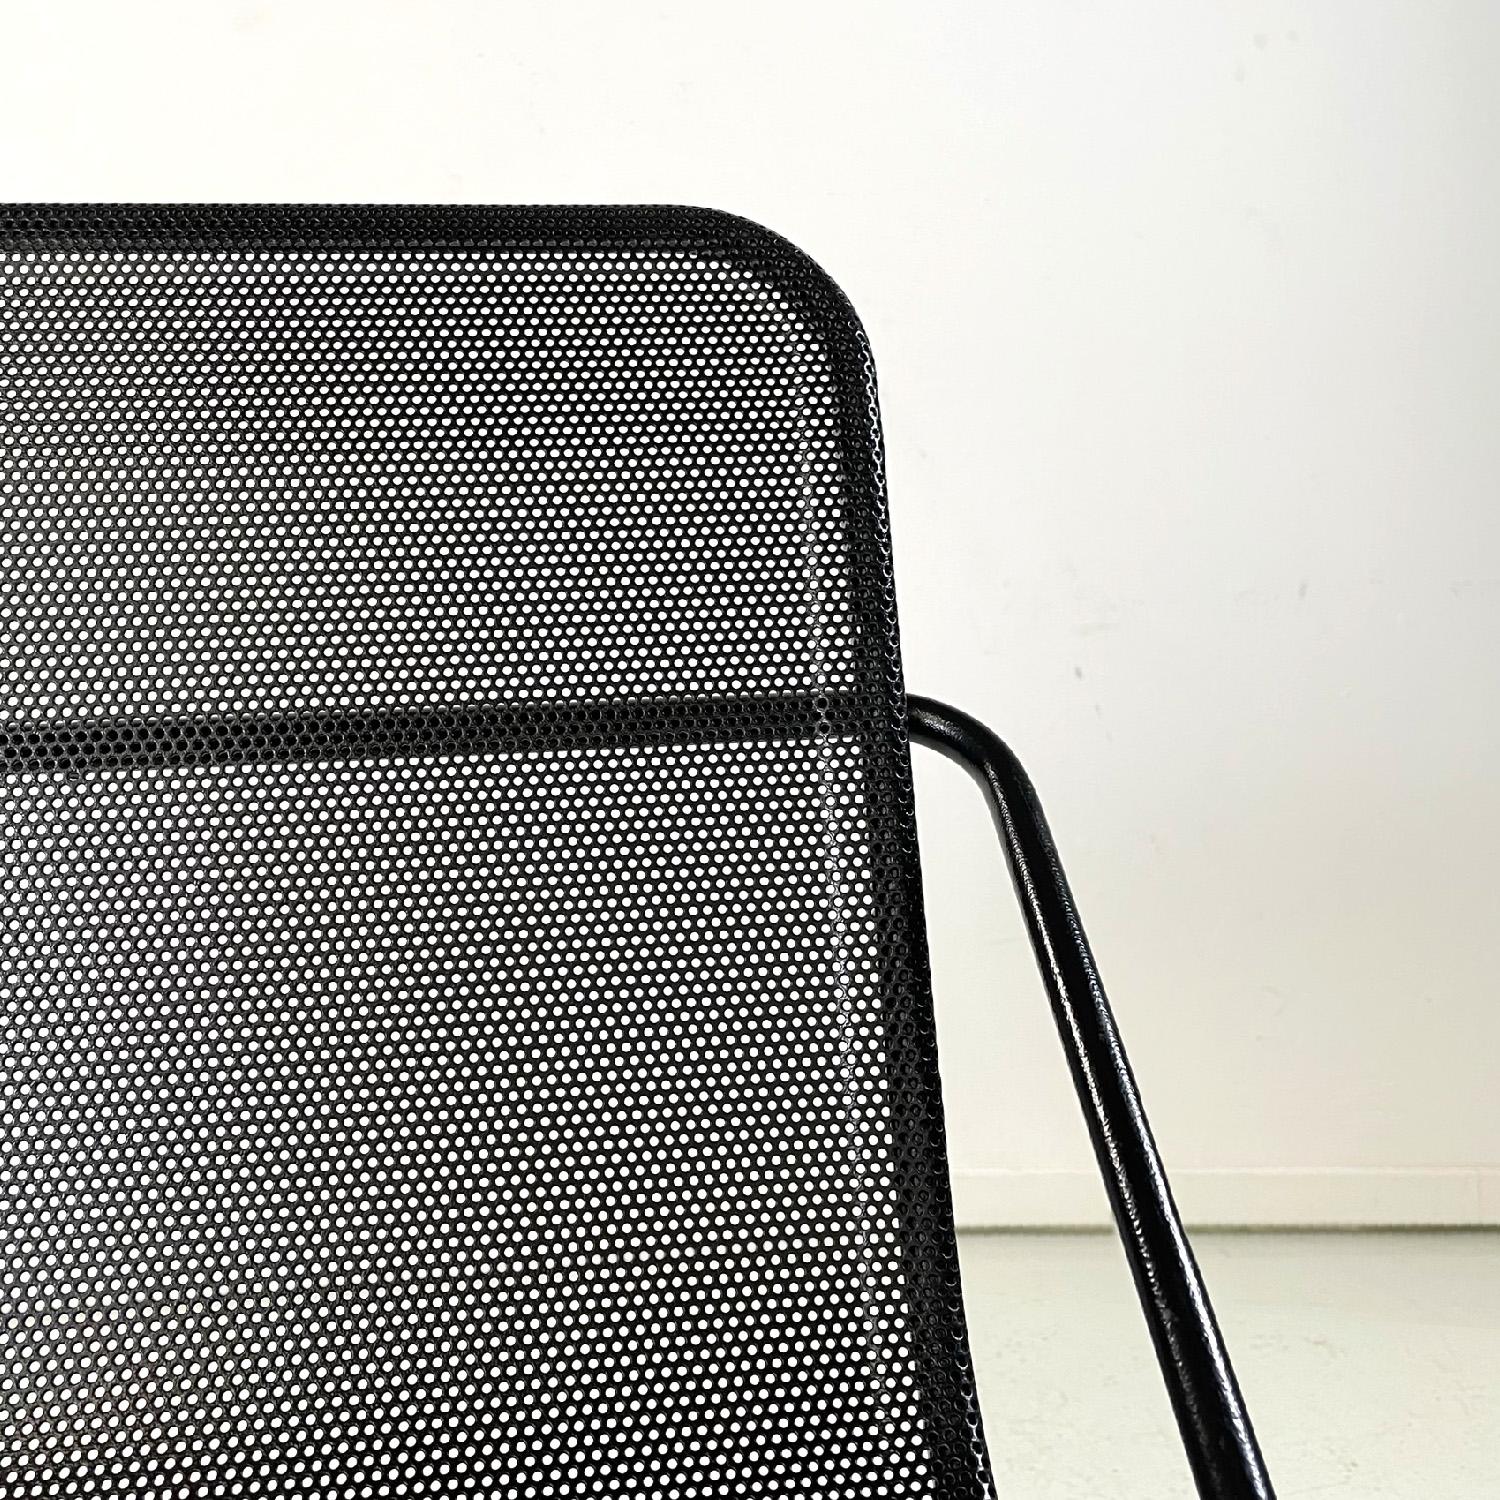 Italian modern metal rod and perforated metal sheet black metal chairs, 1980s For Sale 8